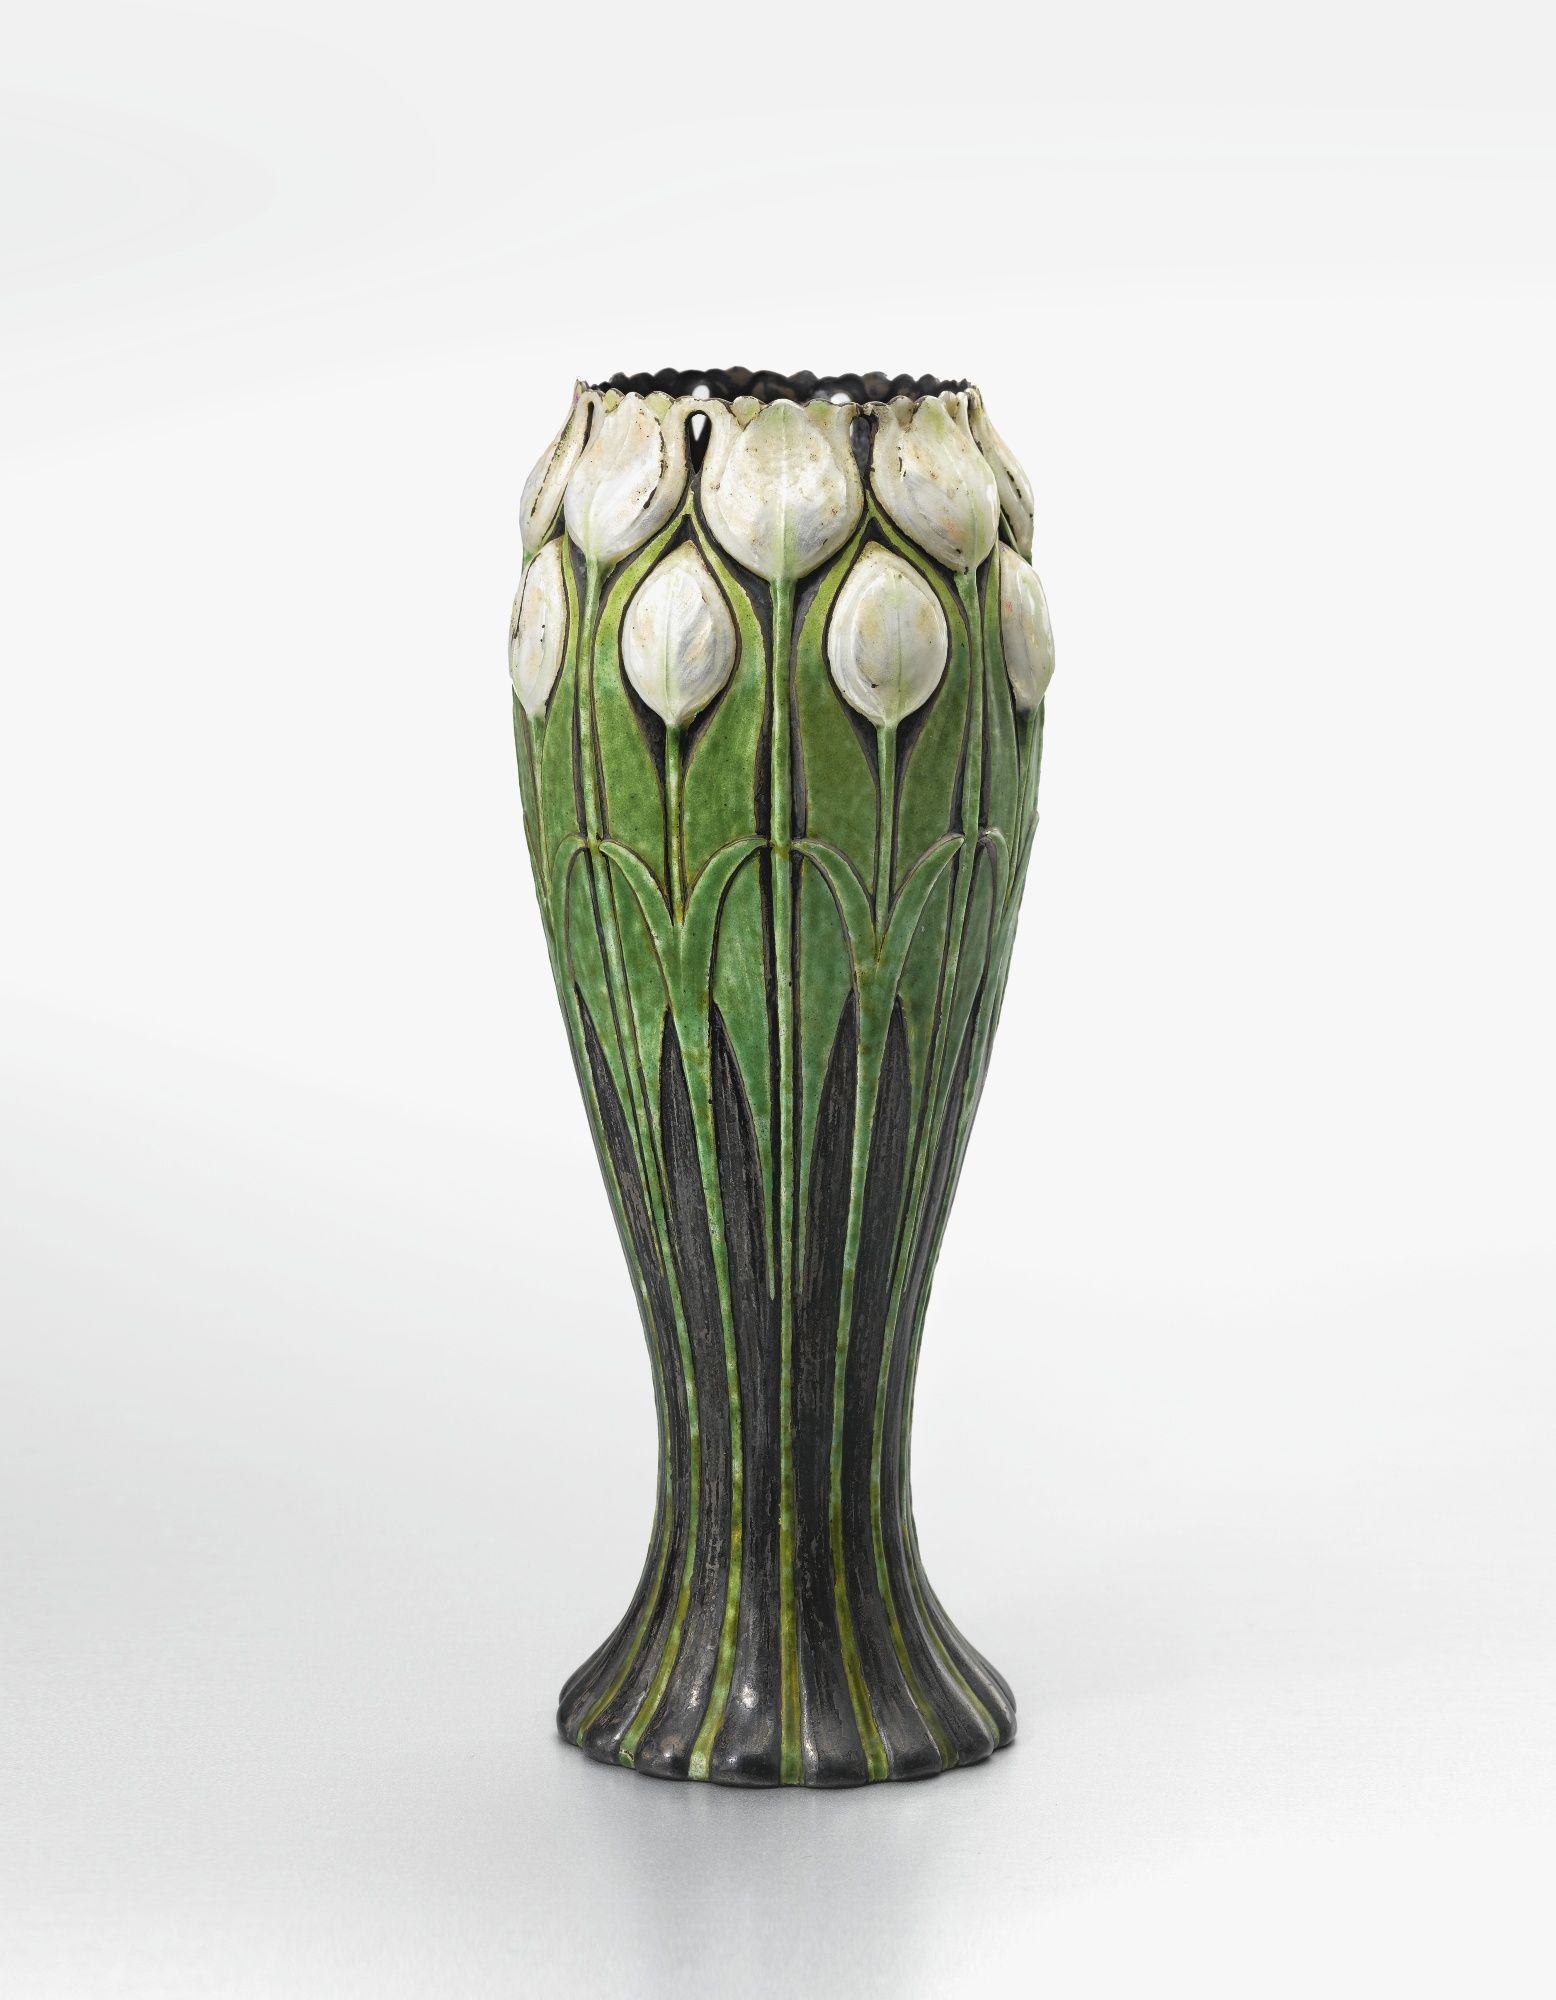 24 Unique Buy Vase Online 2024 free download buy vase online of tiffany co tulip vase impressed tiffany co 16568 makers 4105 with regard to buy online view images and see past prices for tiffany co